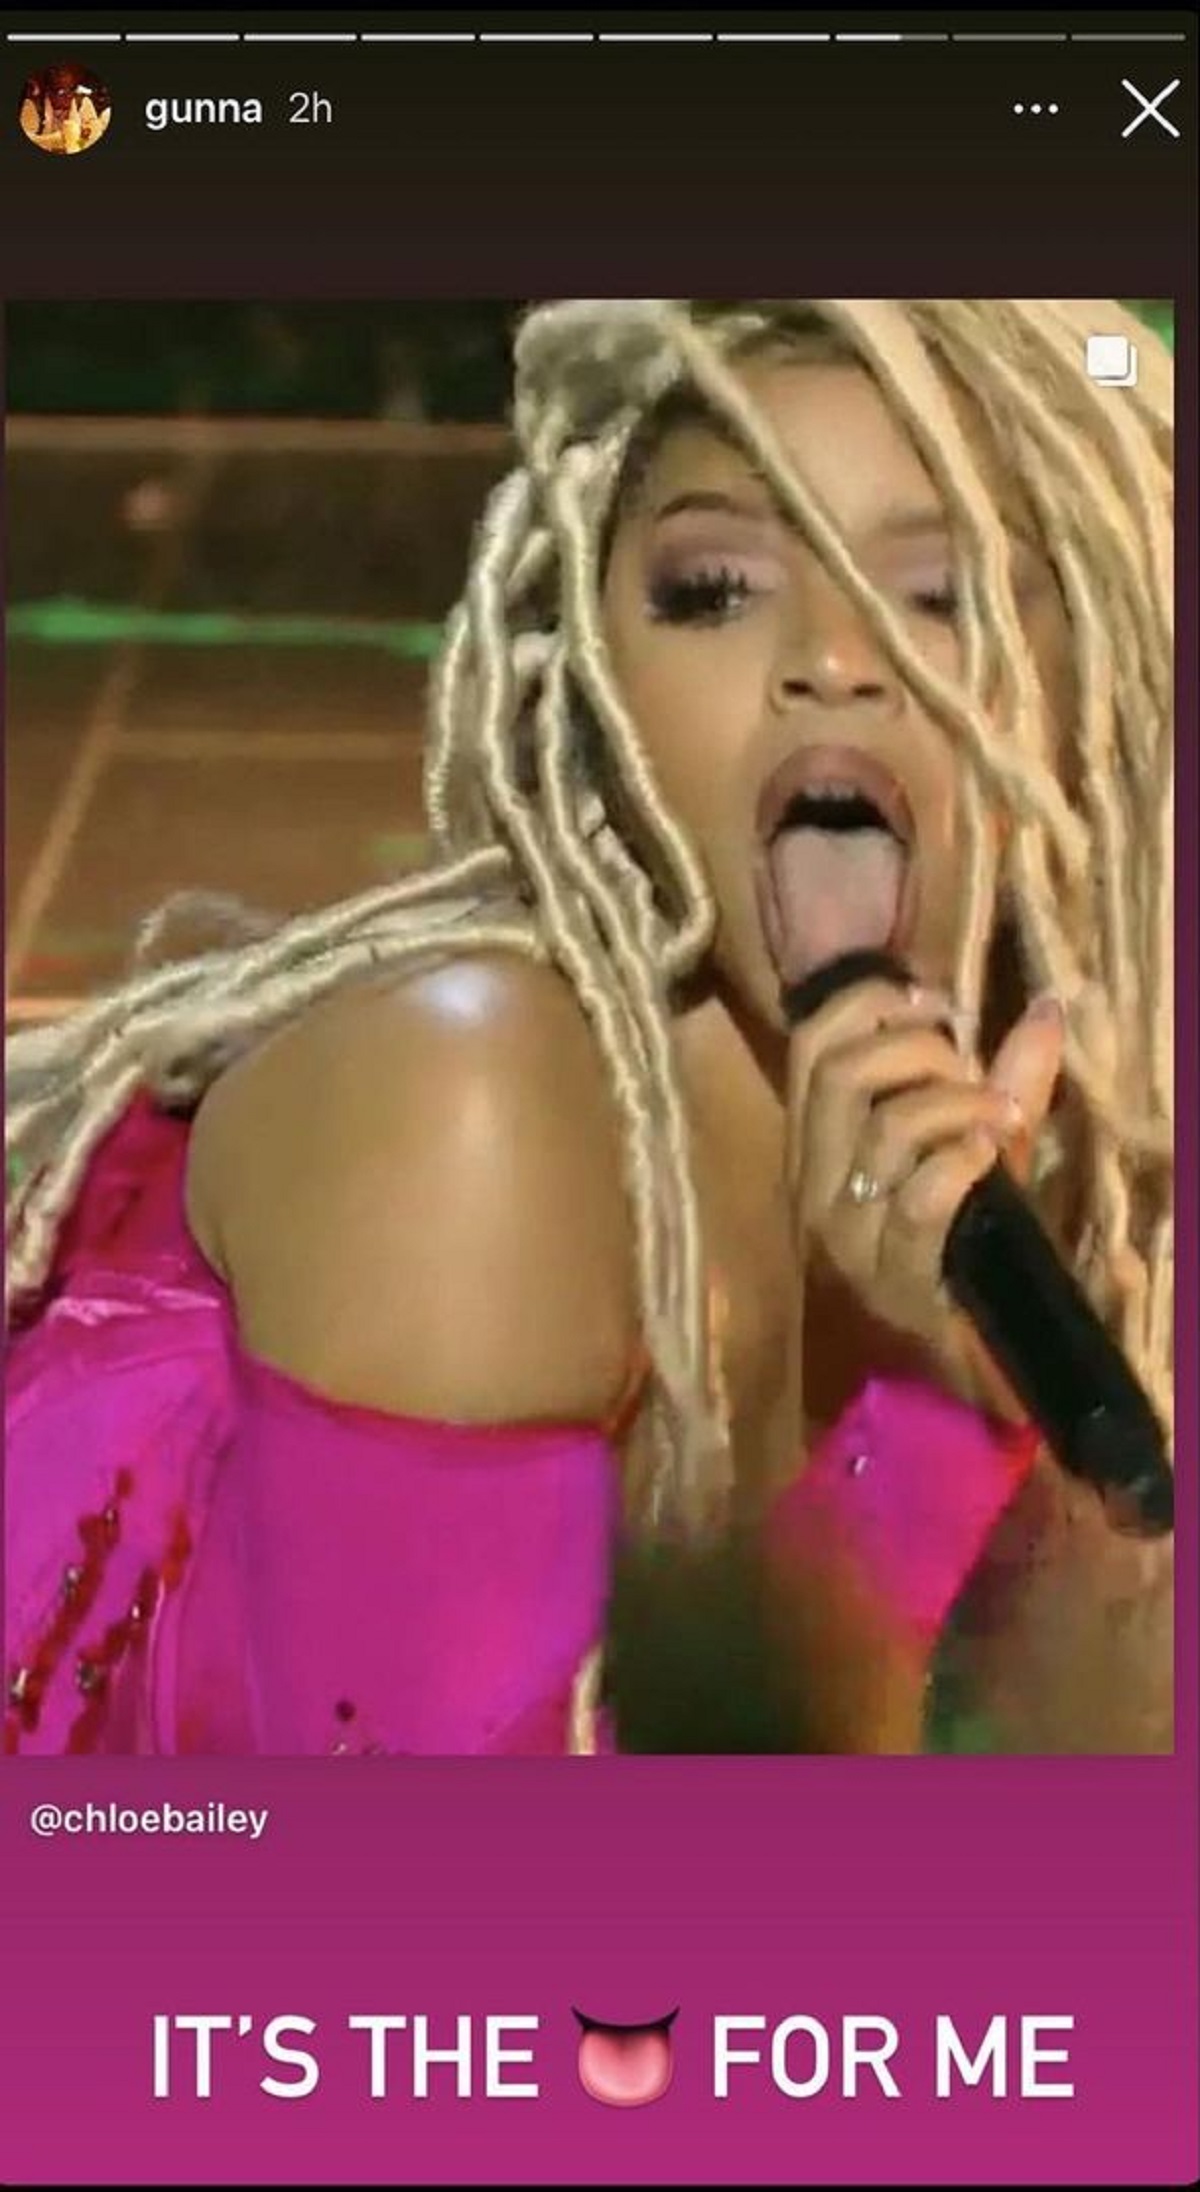 Gunna posts Chloe Bailey's VMA performance, with her tongue out, on his IG Story, and says it's the tongue for me